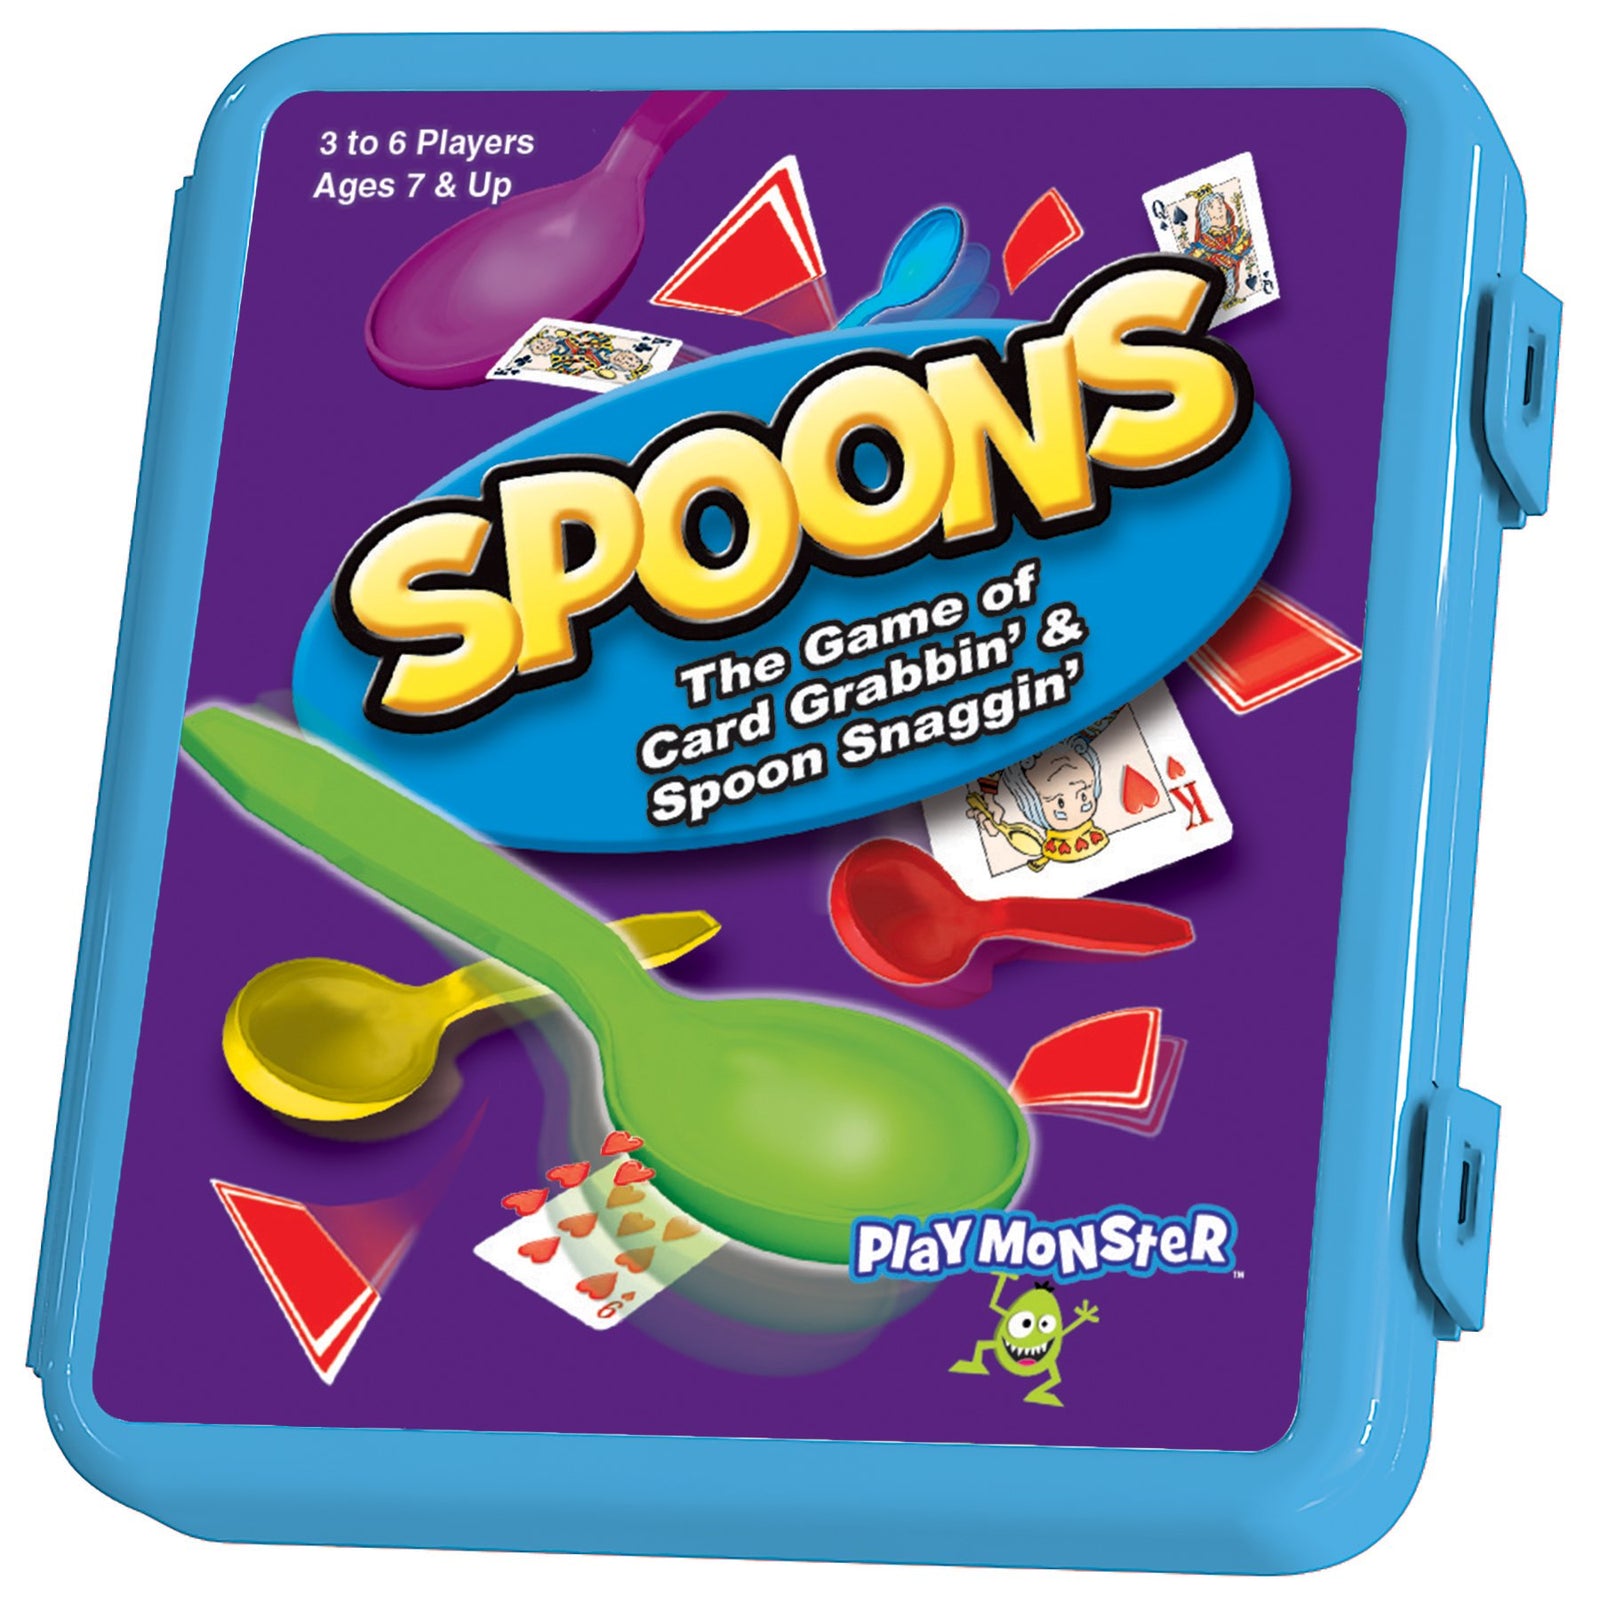 PlayMonster Spoons - The Game of Card Grabbin' & Spoon Snaggin', 6772